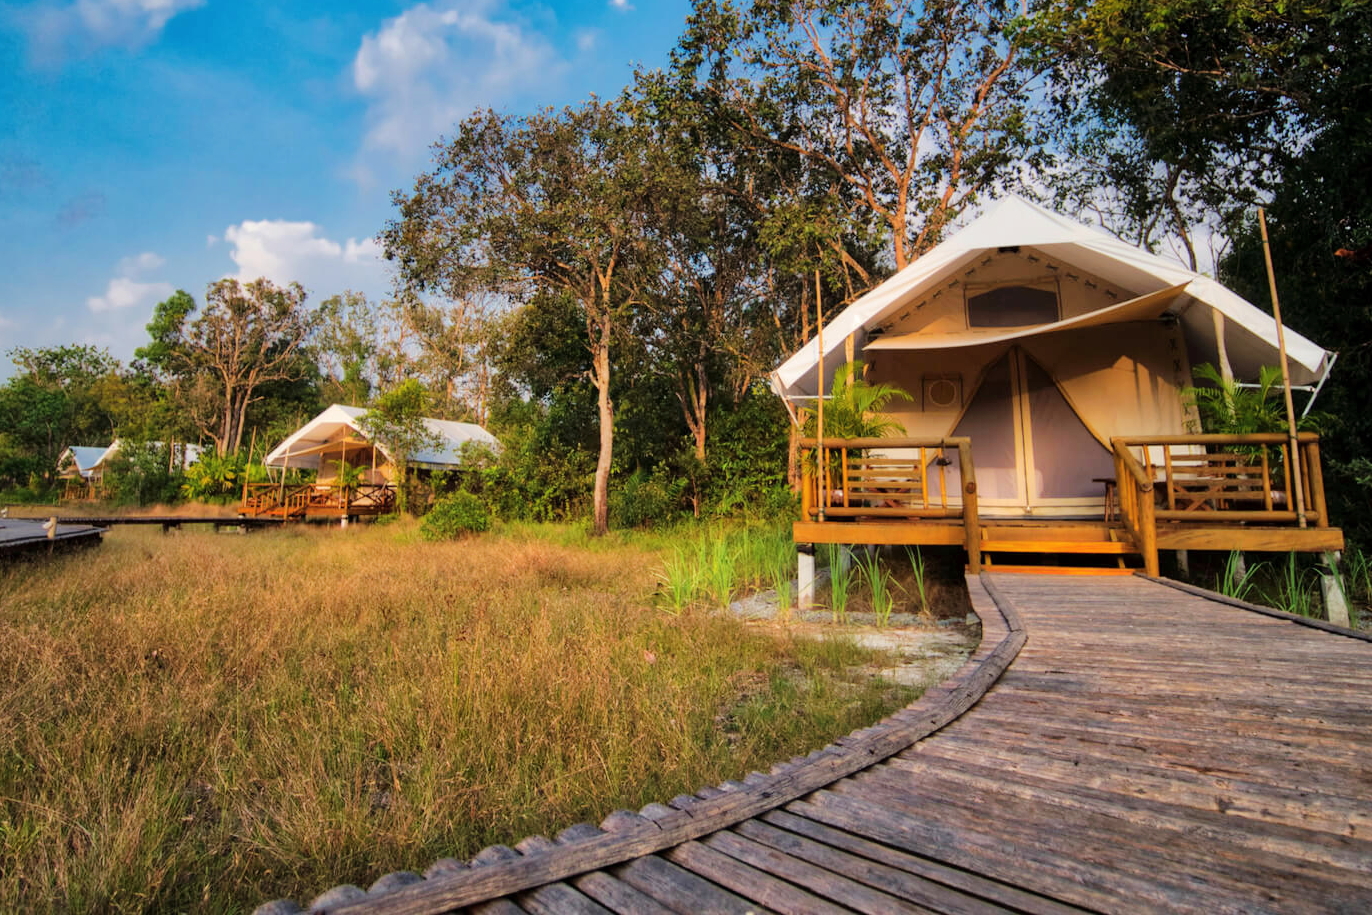 Cardamom Tented Camp in Cambodia. Click to enlarge.